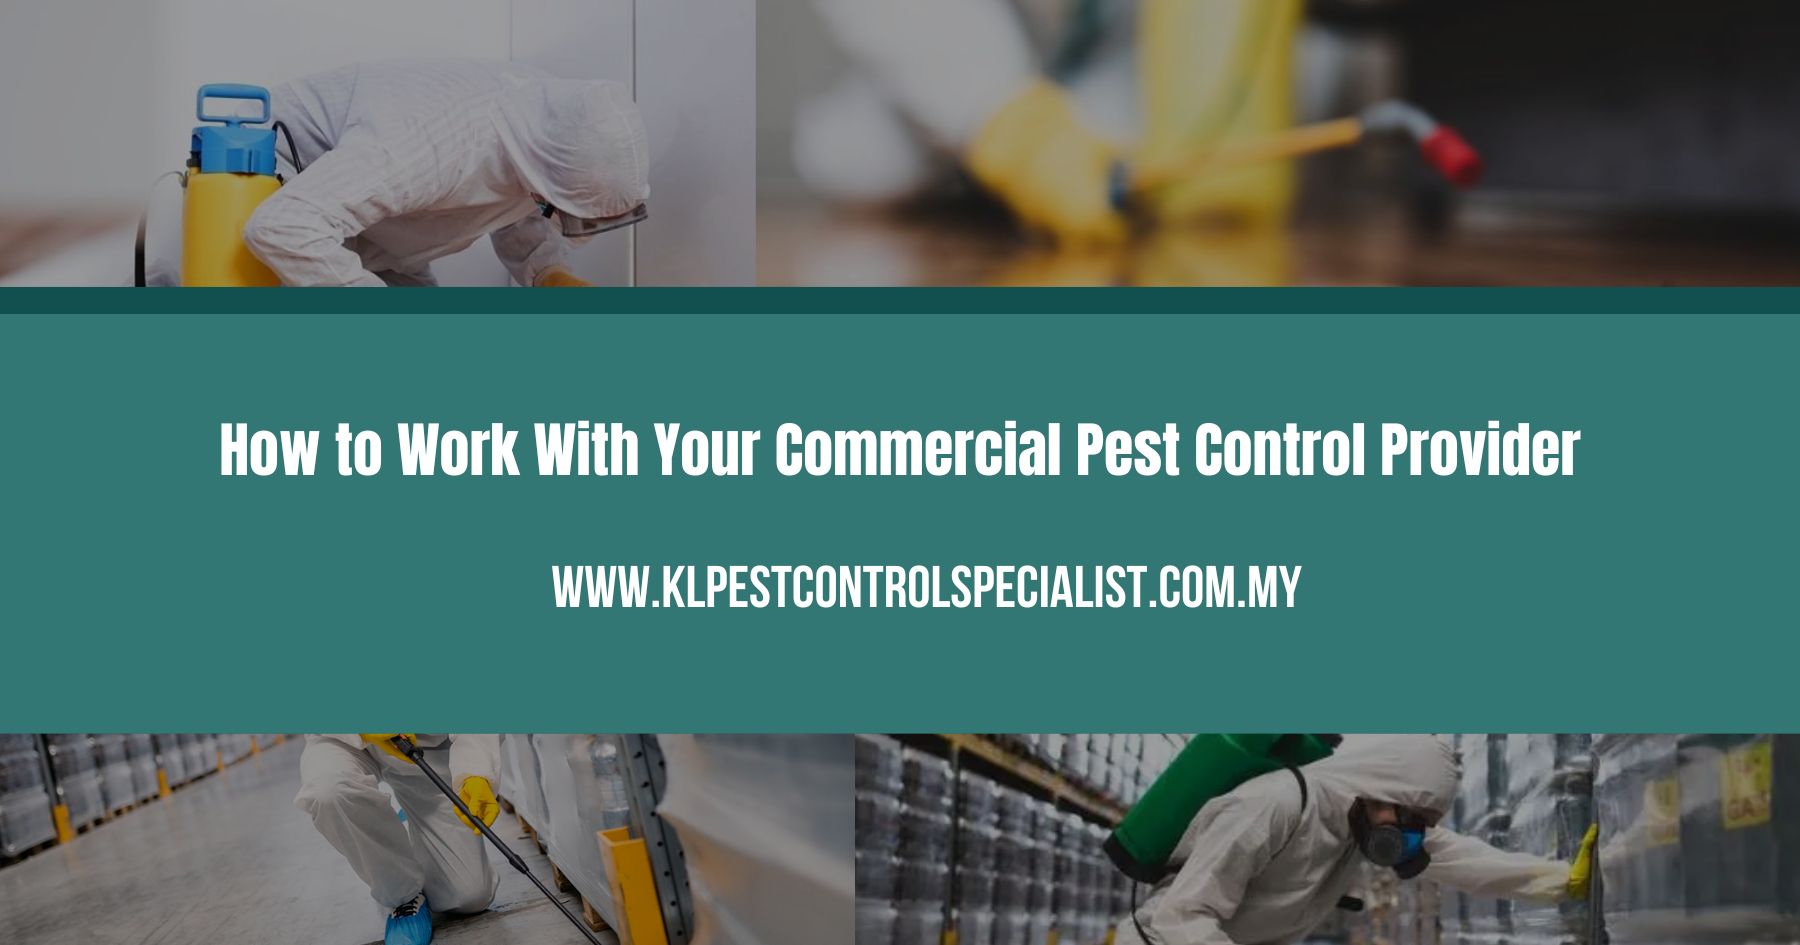 How to Work With Your Commercial Pest Control Provider